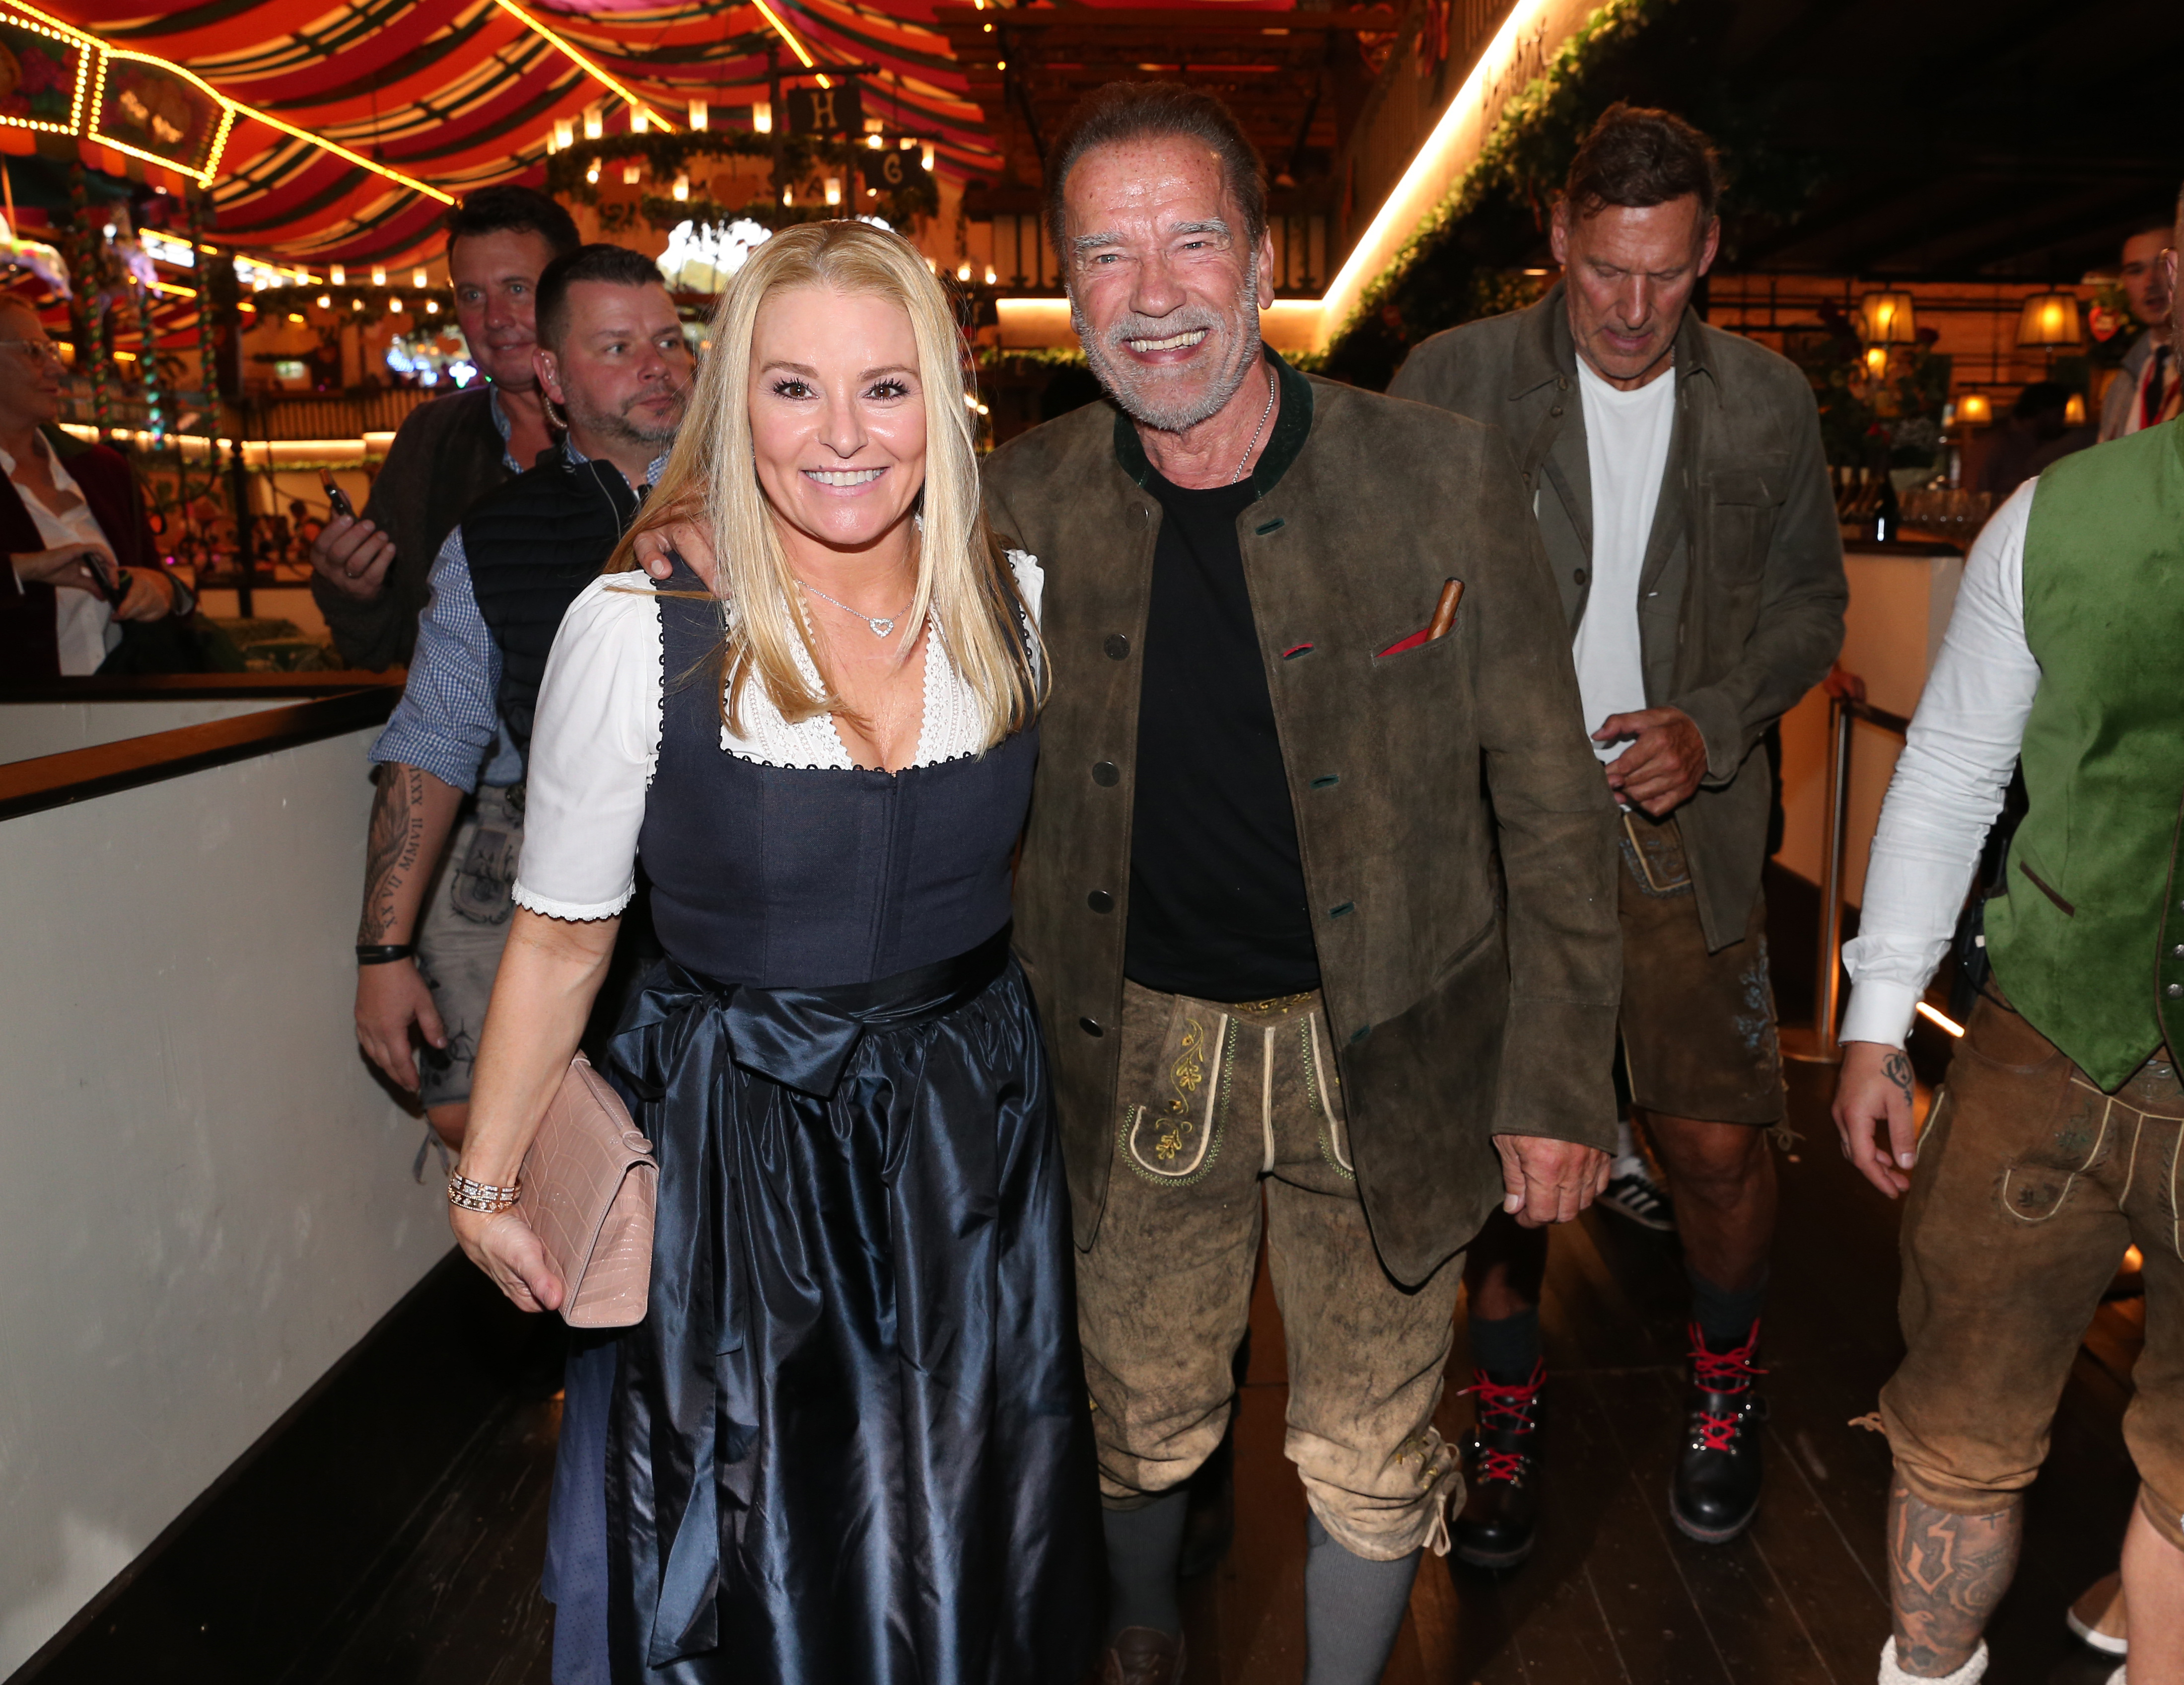 Arnold Schwarzenegger and his girlfriend Heather Milligan during the 187th Oktoberfest at Marstall tent /Theresienwiese on September 24, 2022 in Munich, Germany | Source: Getty Images